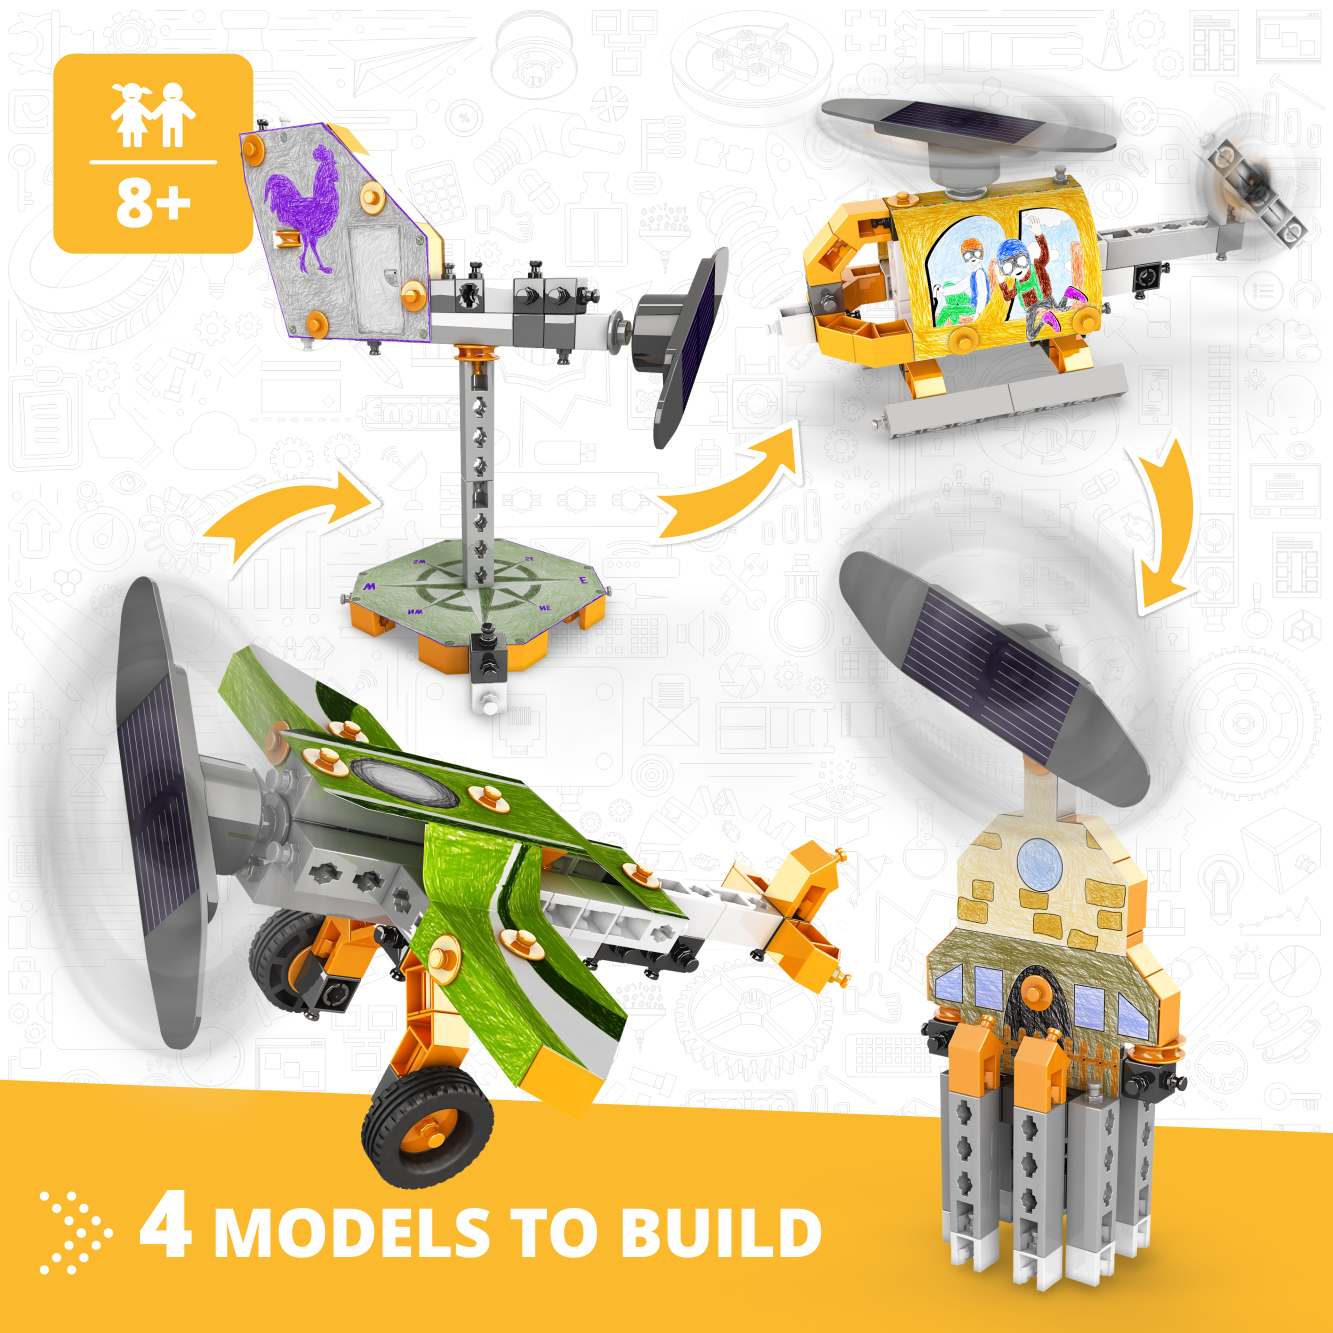 "STEM LABS - How Solar Energy Works Toy" product image with models